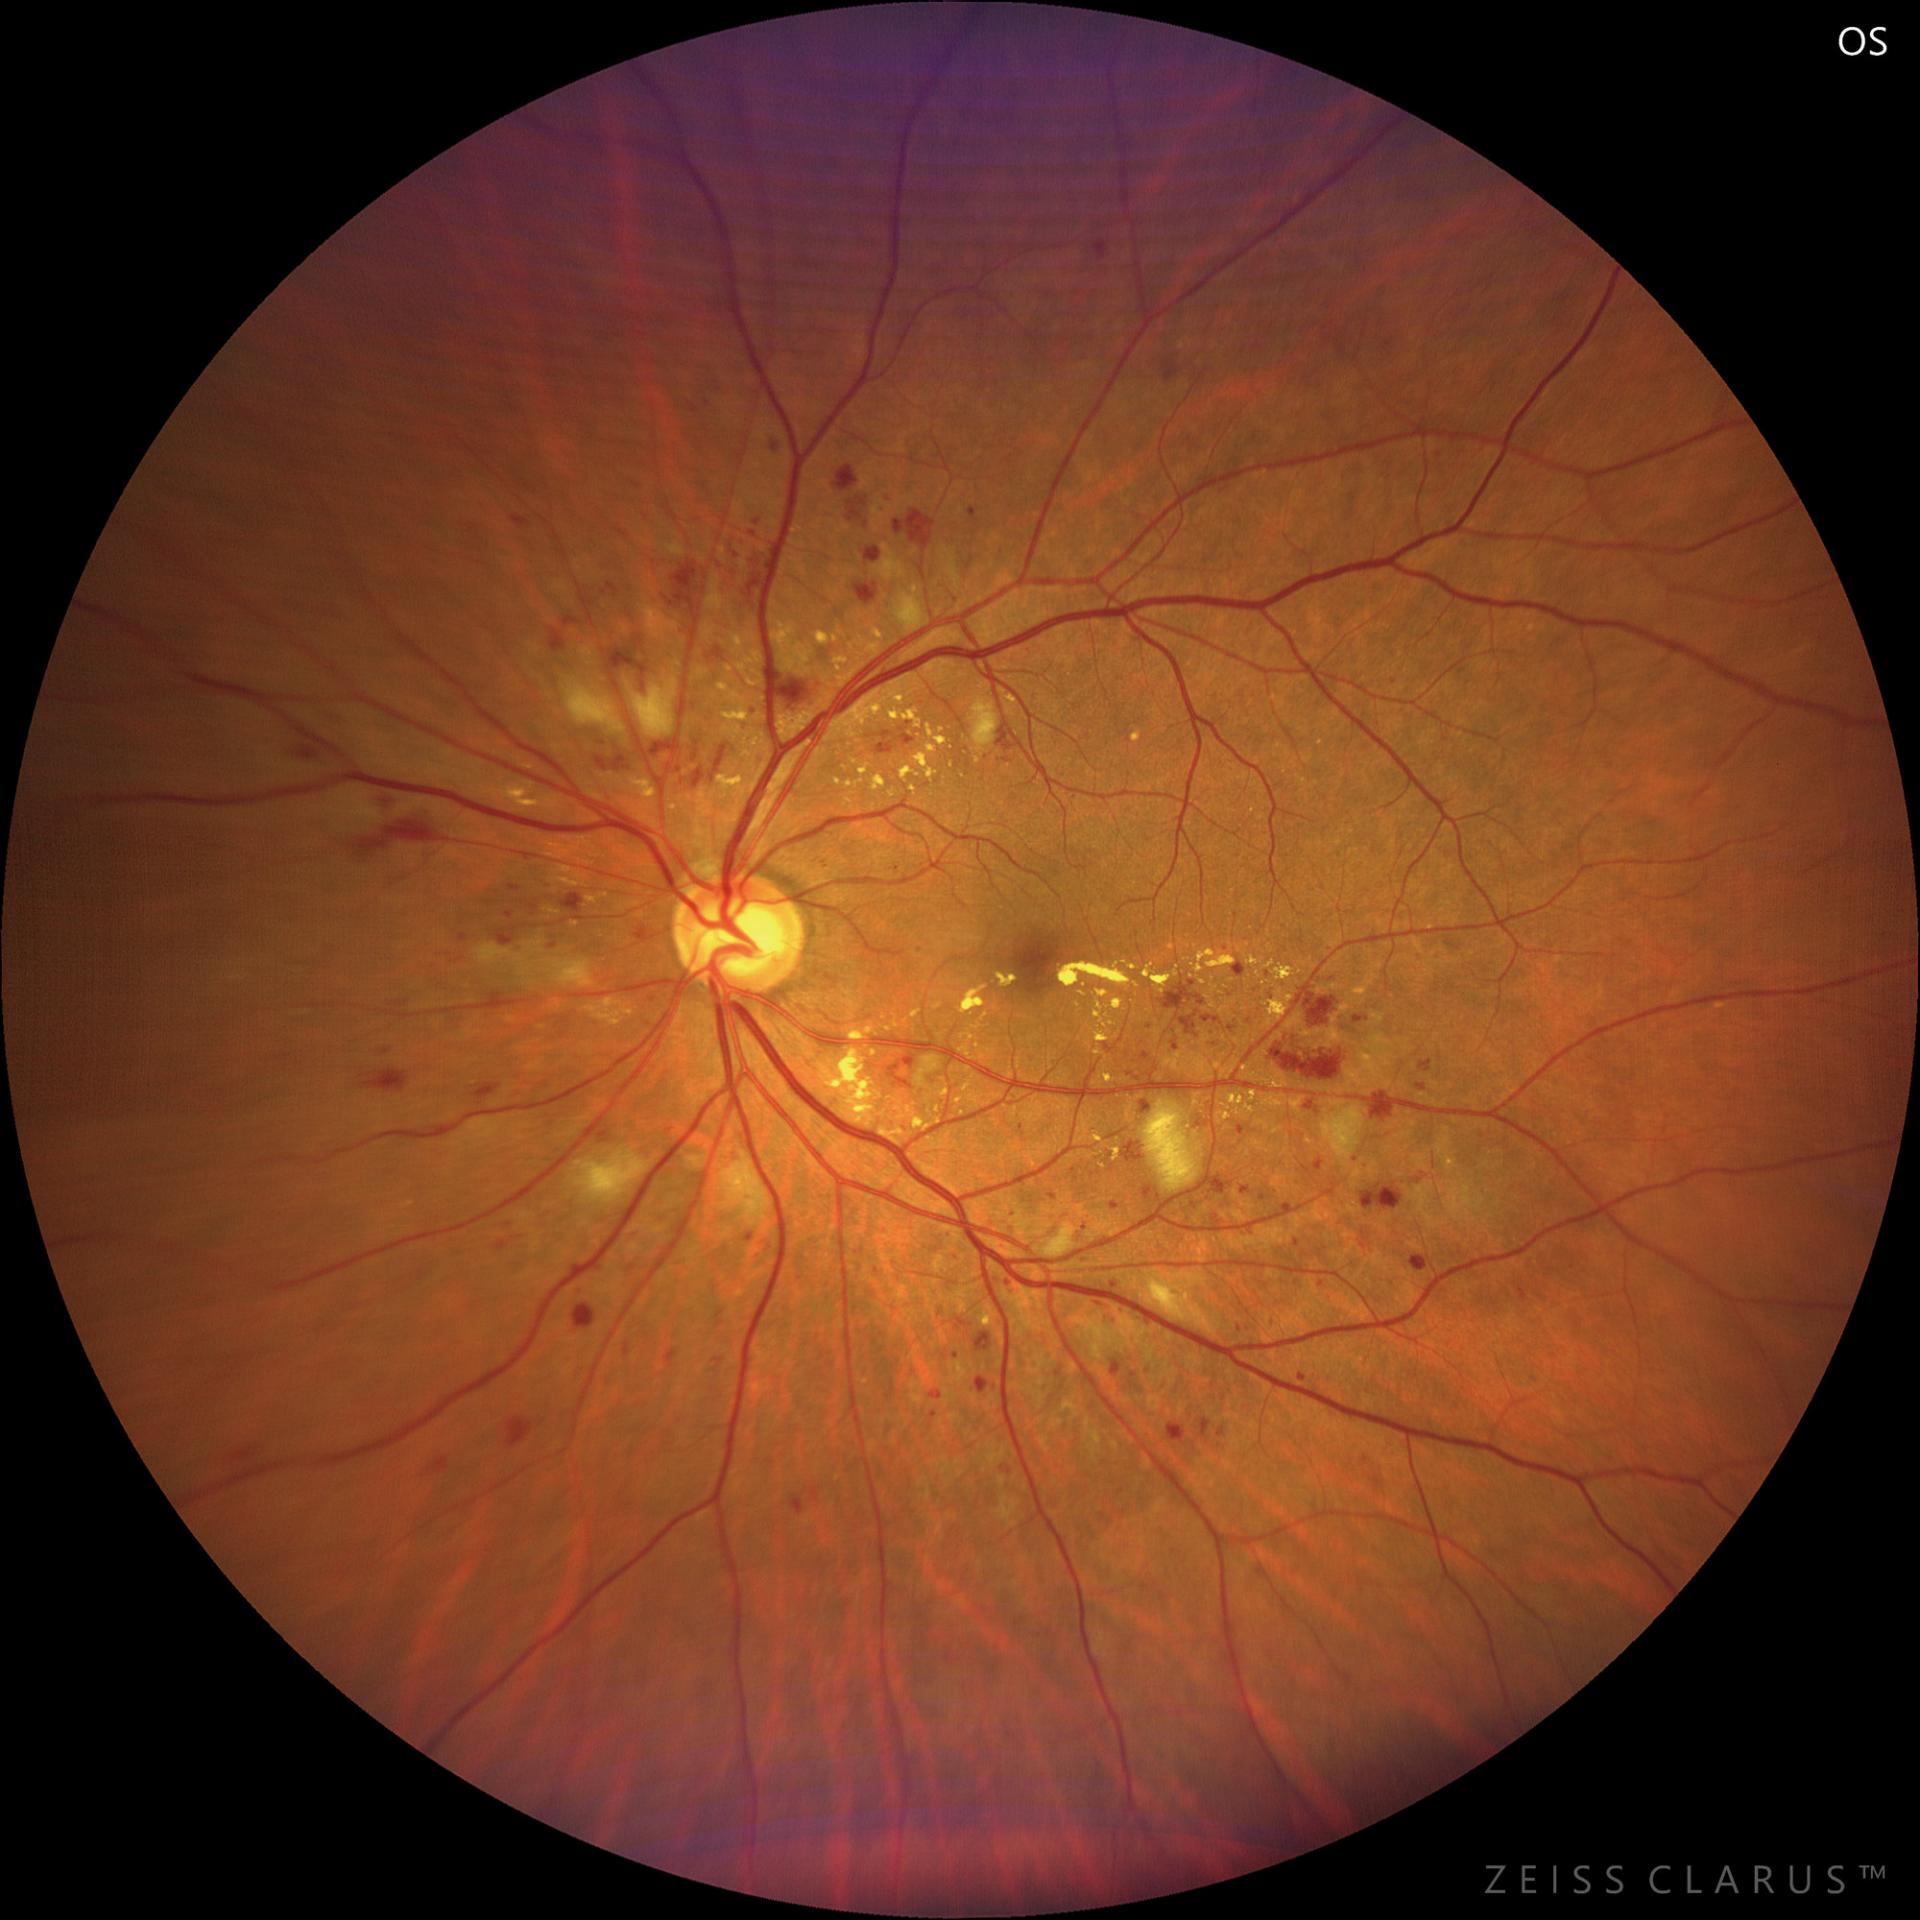 WF 133° magnified image of the macular subauricular hemorrhage area